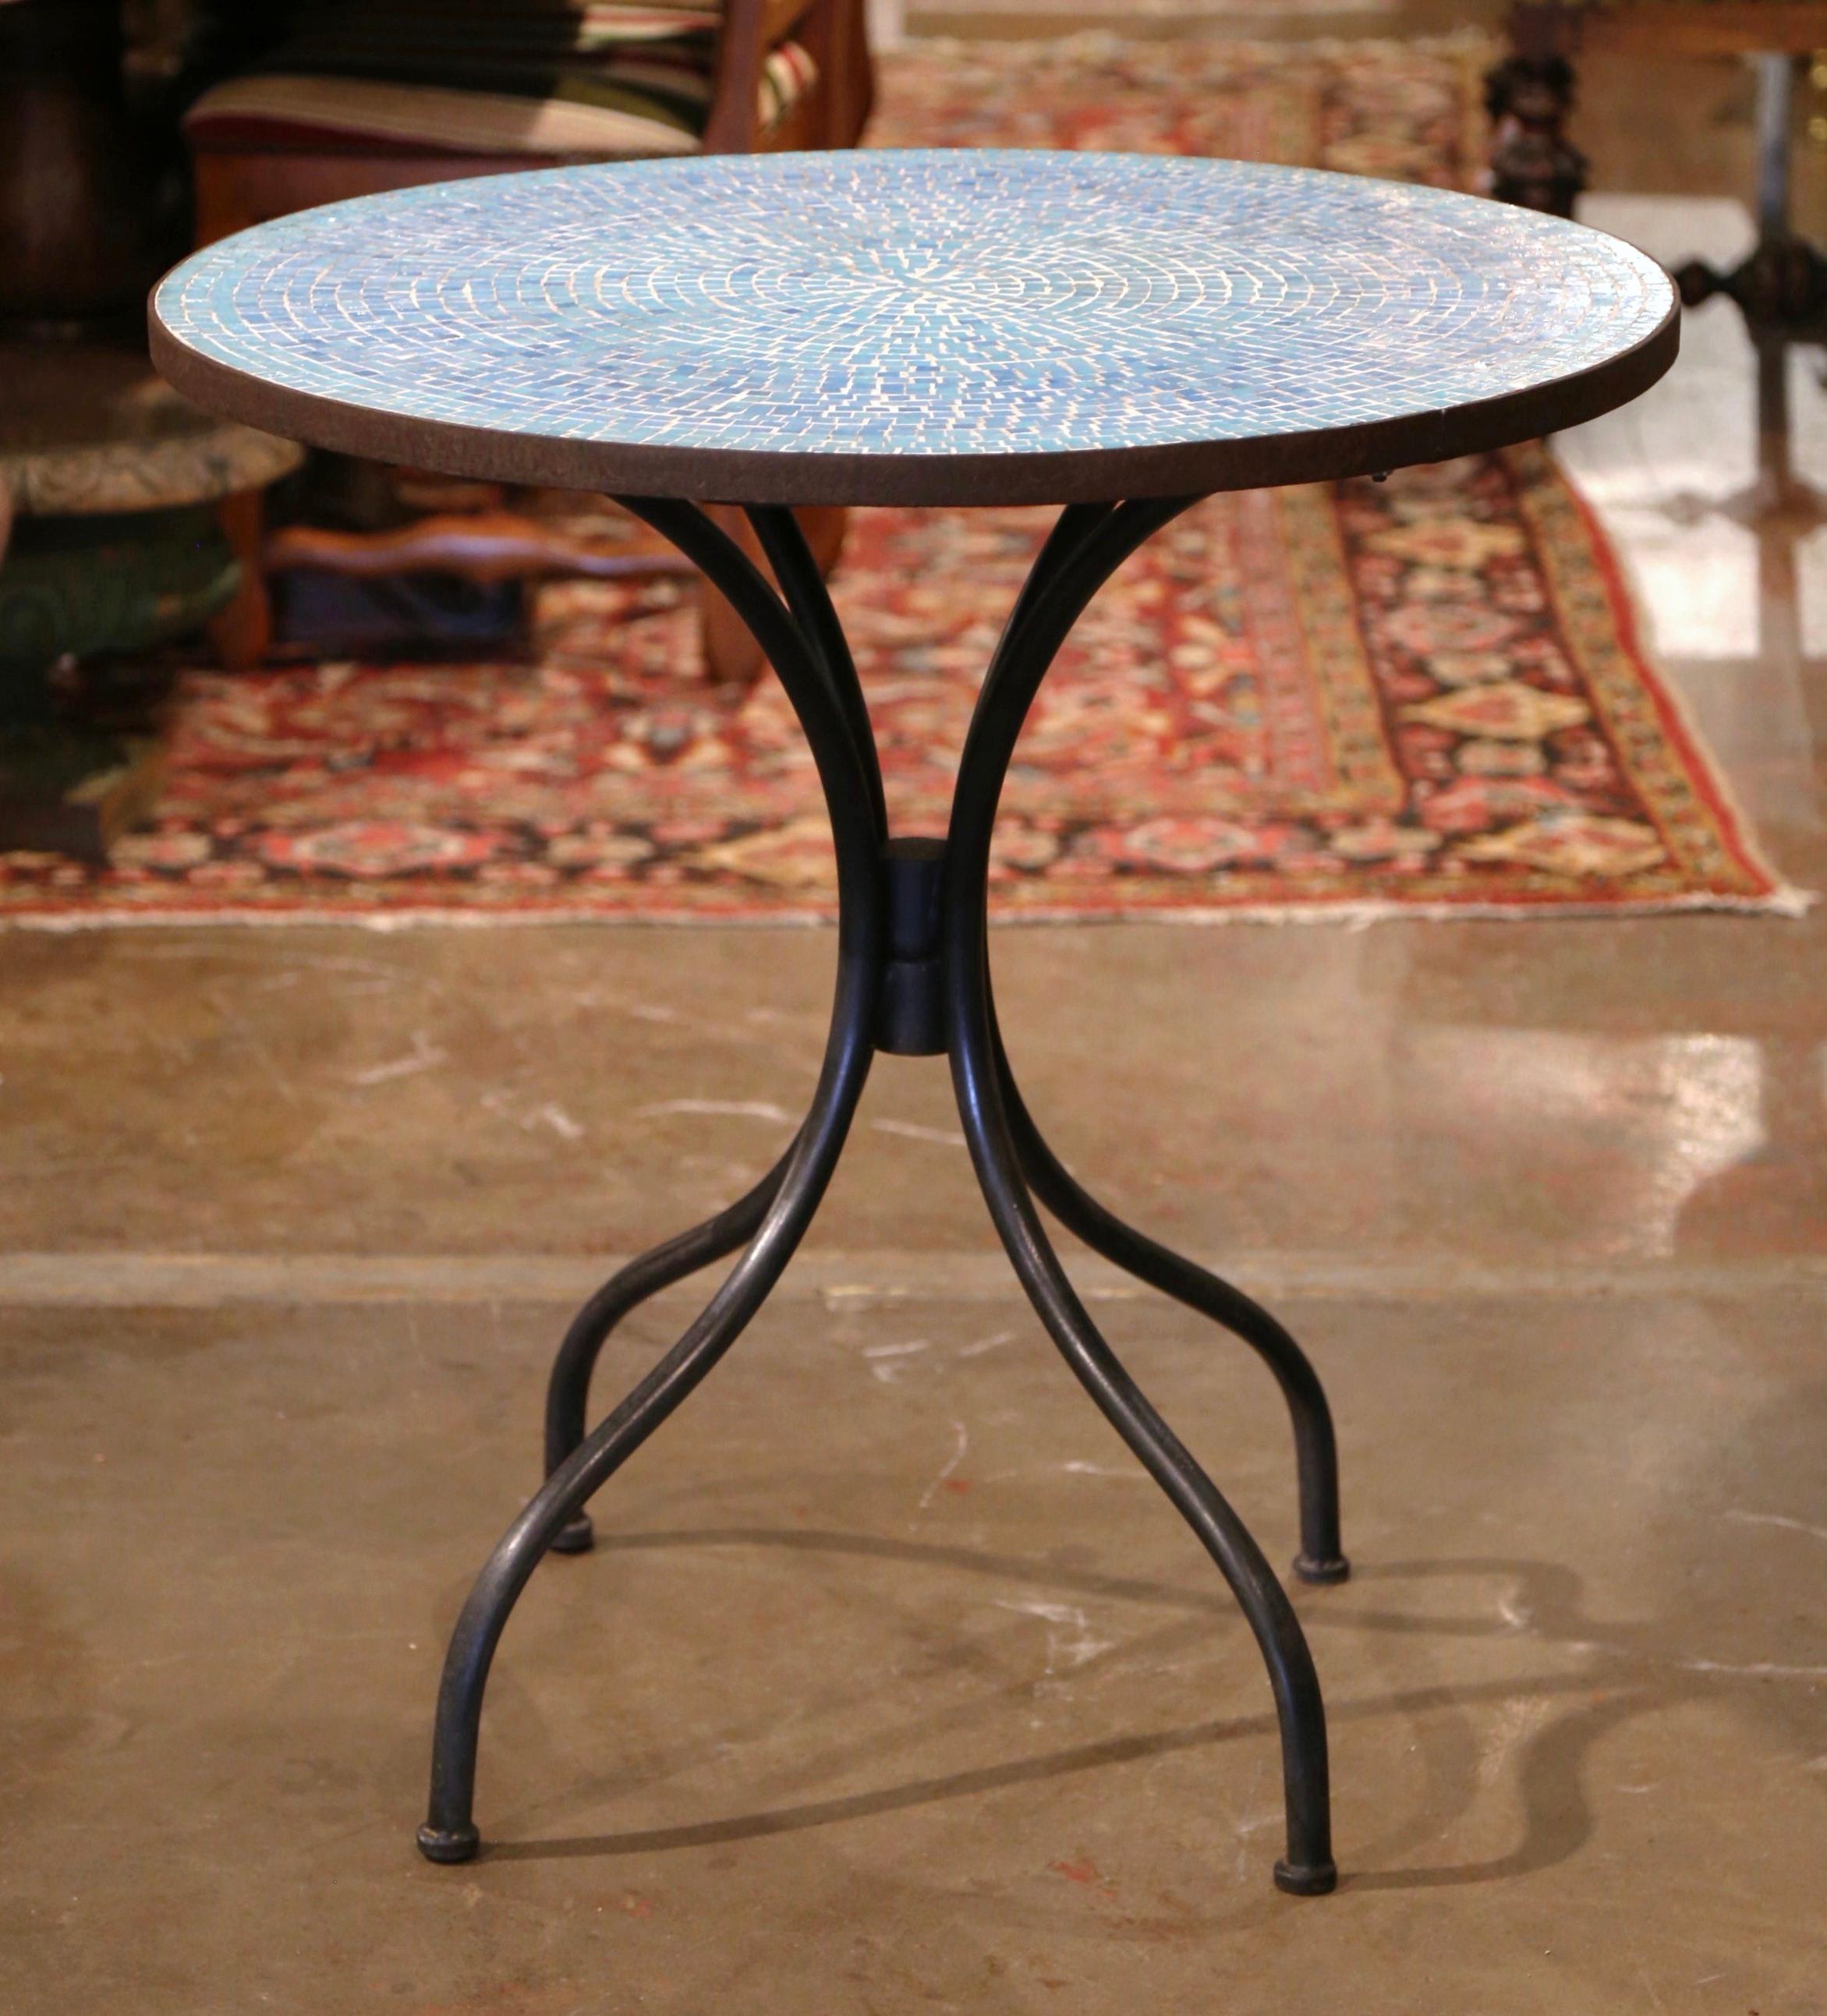 Country Early 20th Century Parisian Iron Bistrot Table with Mosaic Tile Top